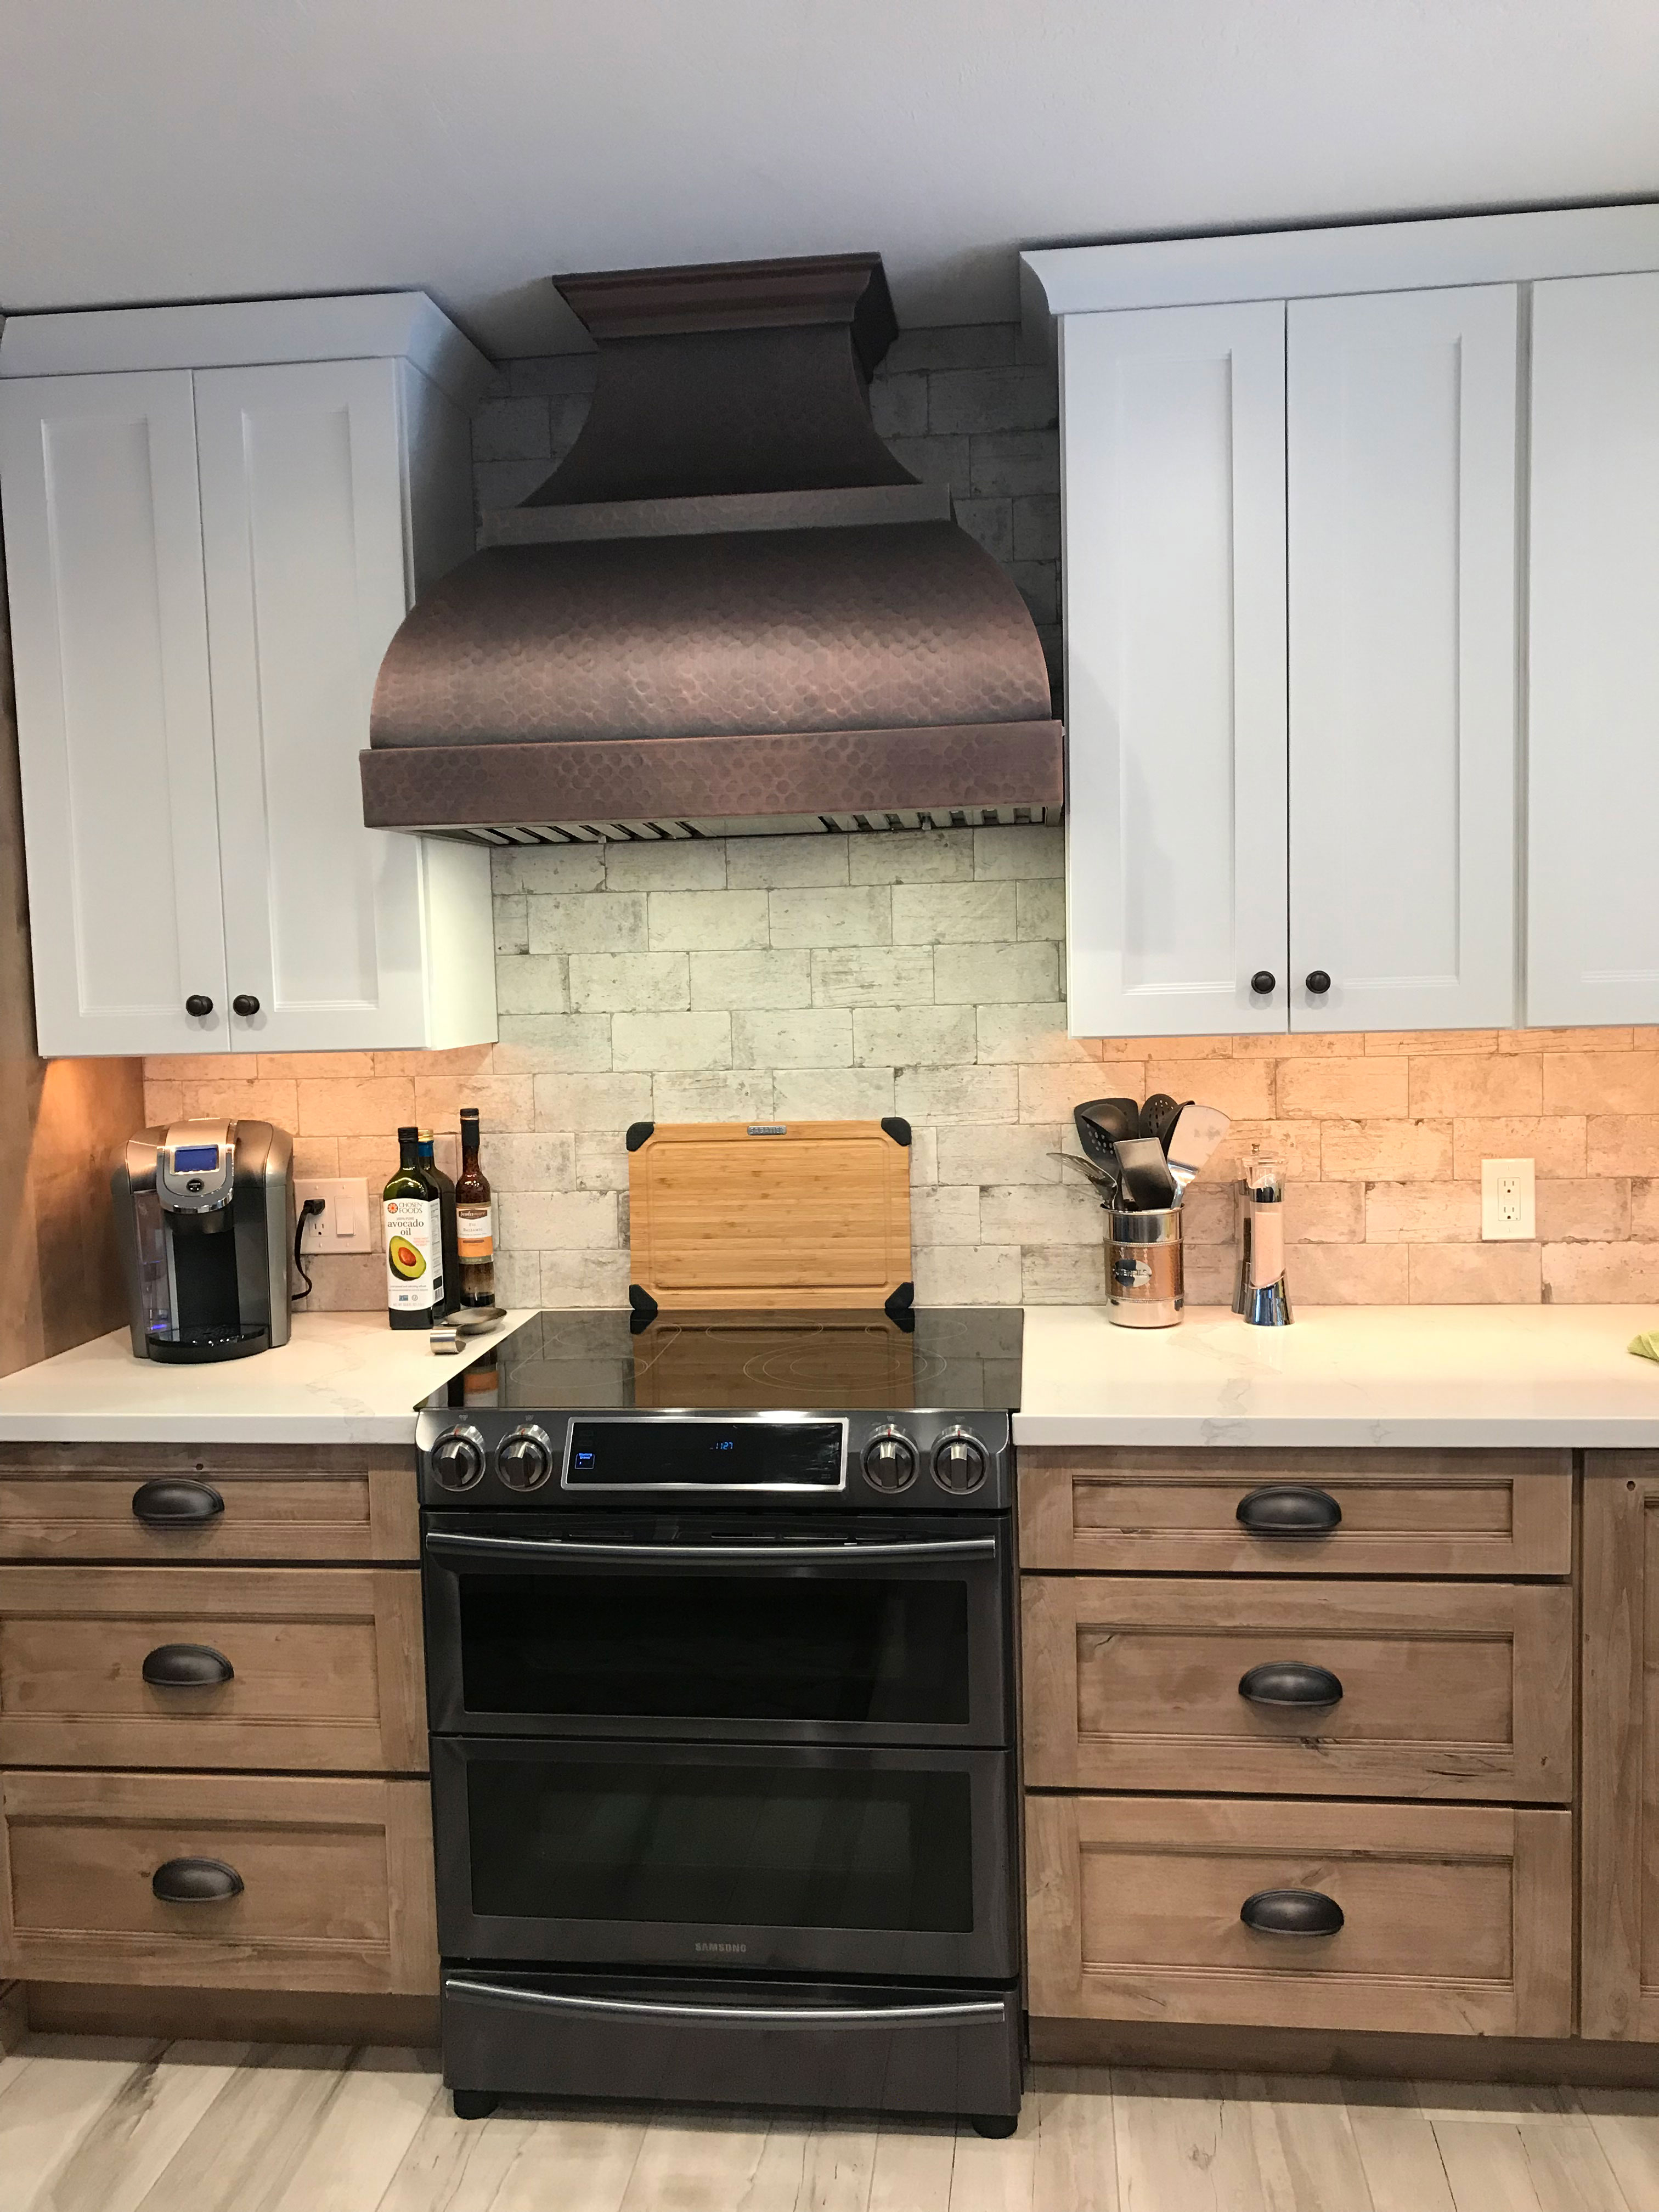 Copper range hood with industrial kitchen renovations,incorporating wood kitchen cabinets with marble kitchen countertops brick backsplash